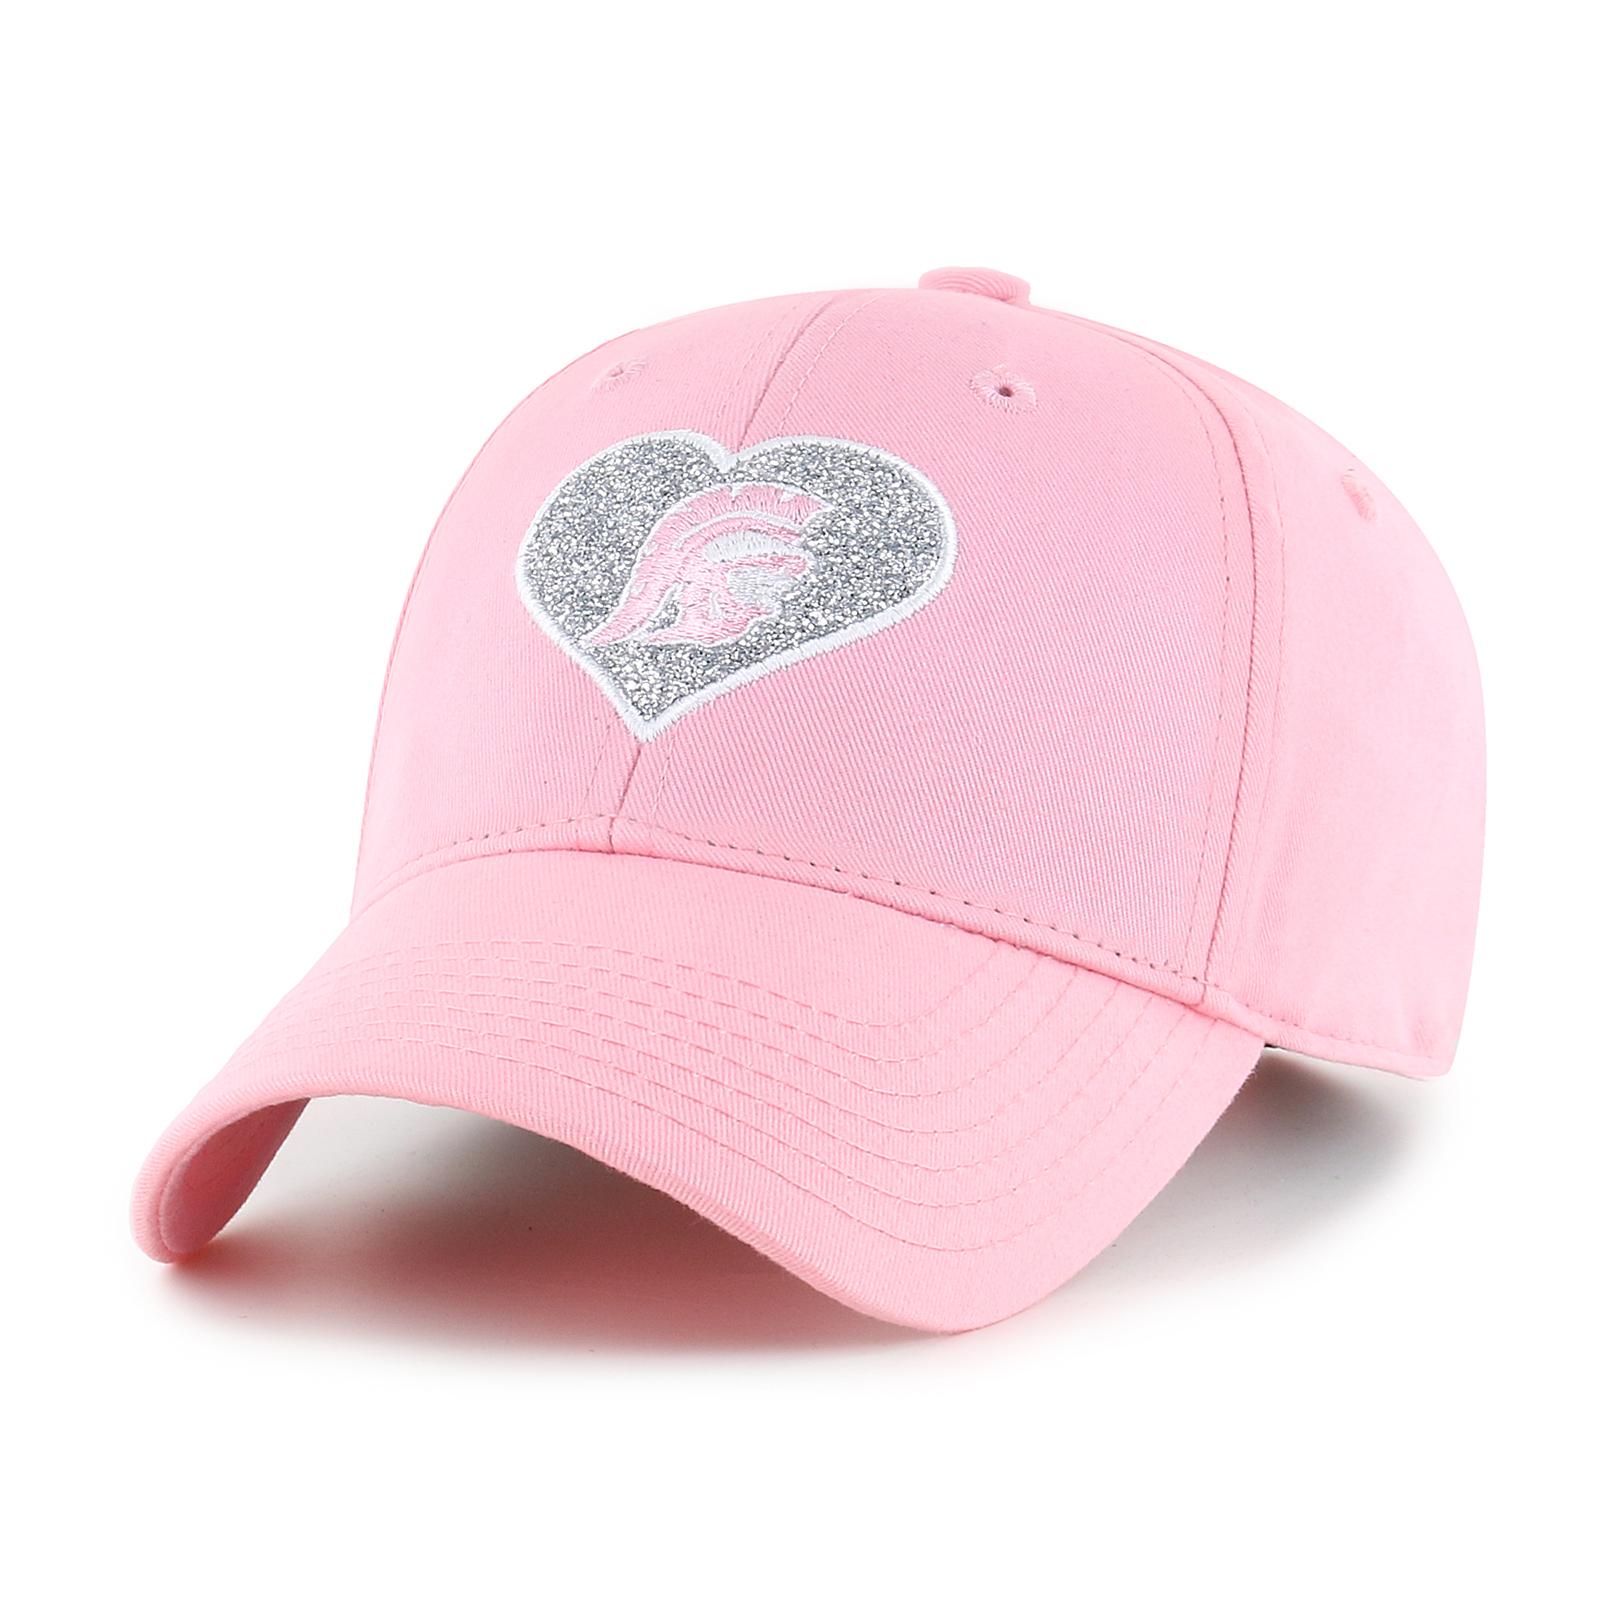 Tommy In Heart Youth Her Dahlia Mvp Cap Sp18 image01